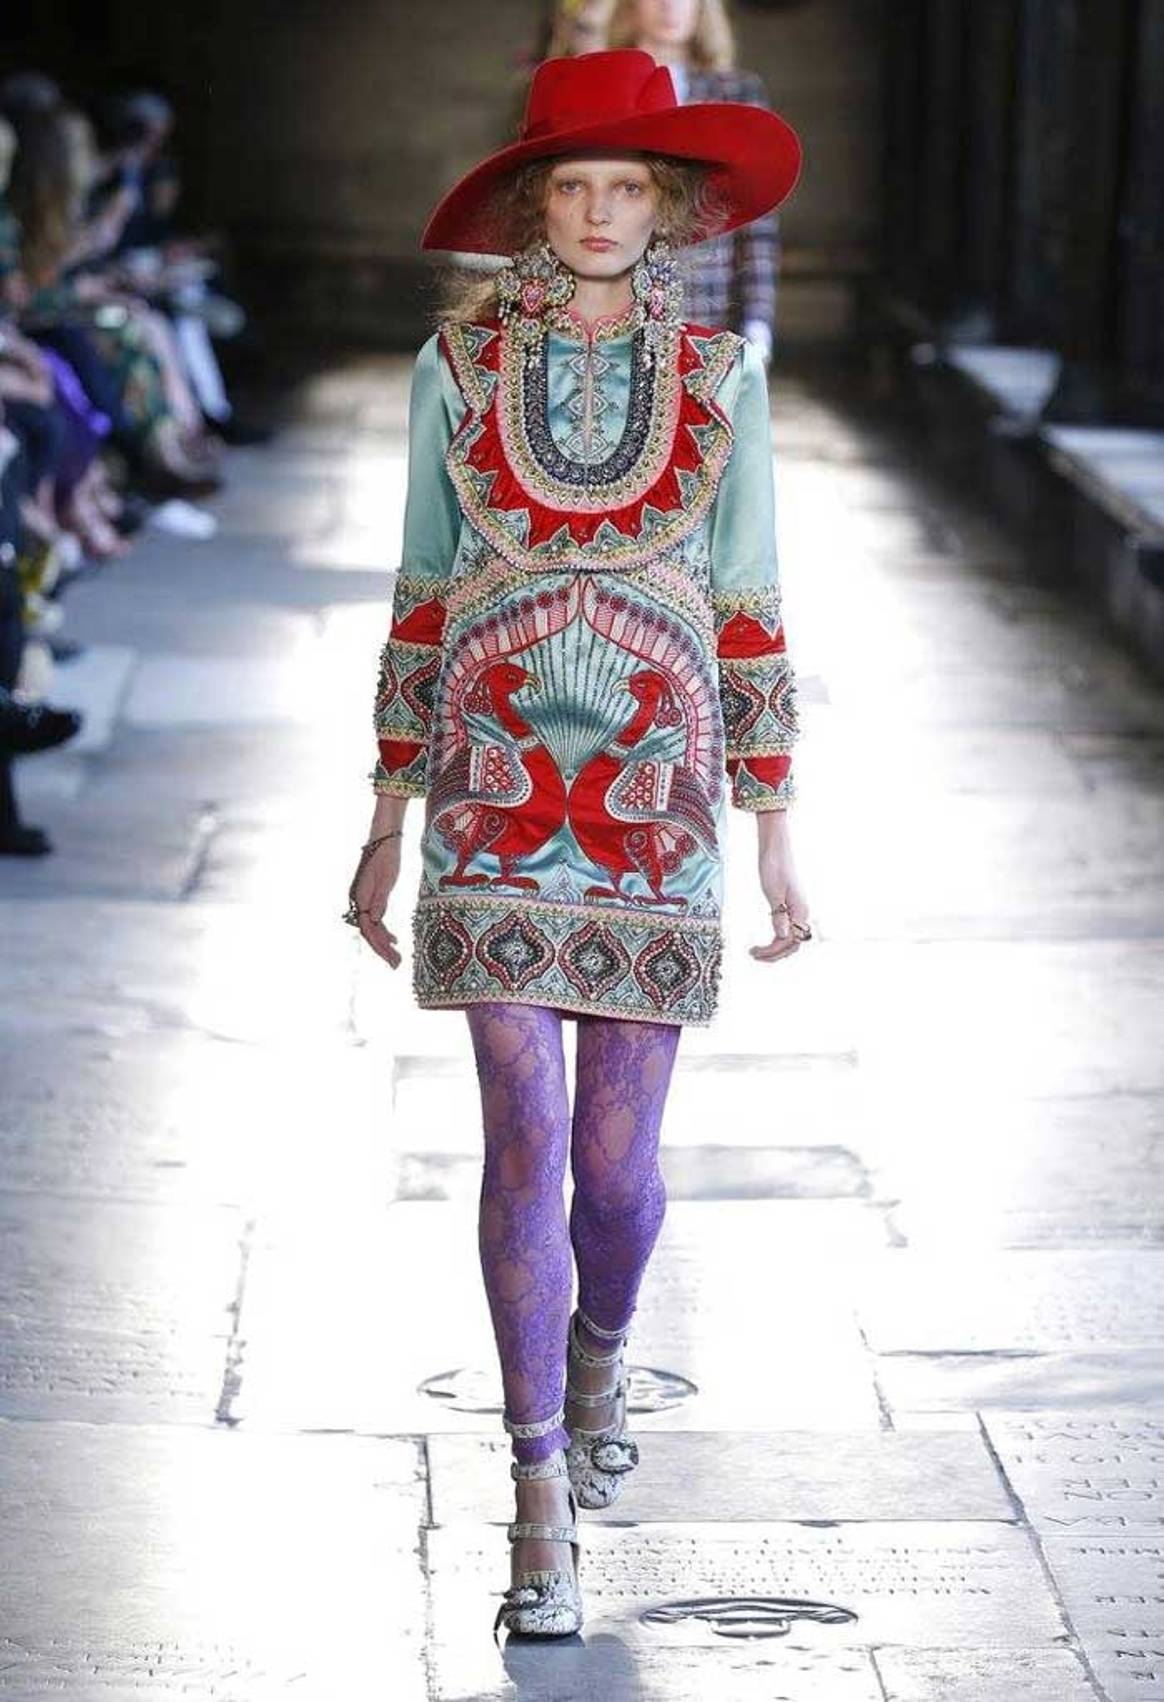 In Beeld: Gucci cruise show in Westminster Abbey